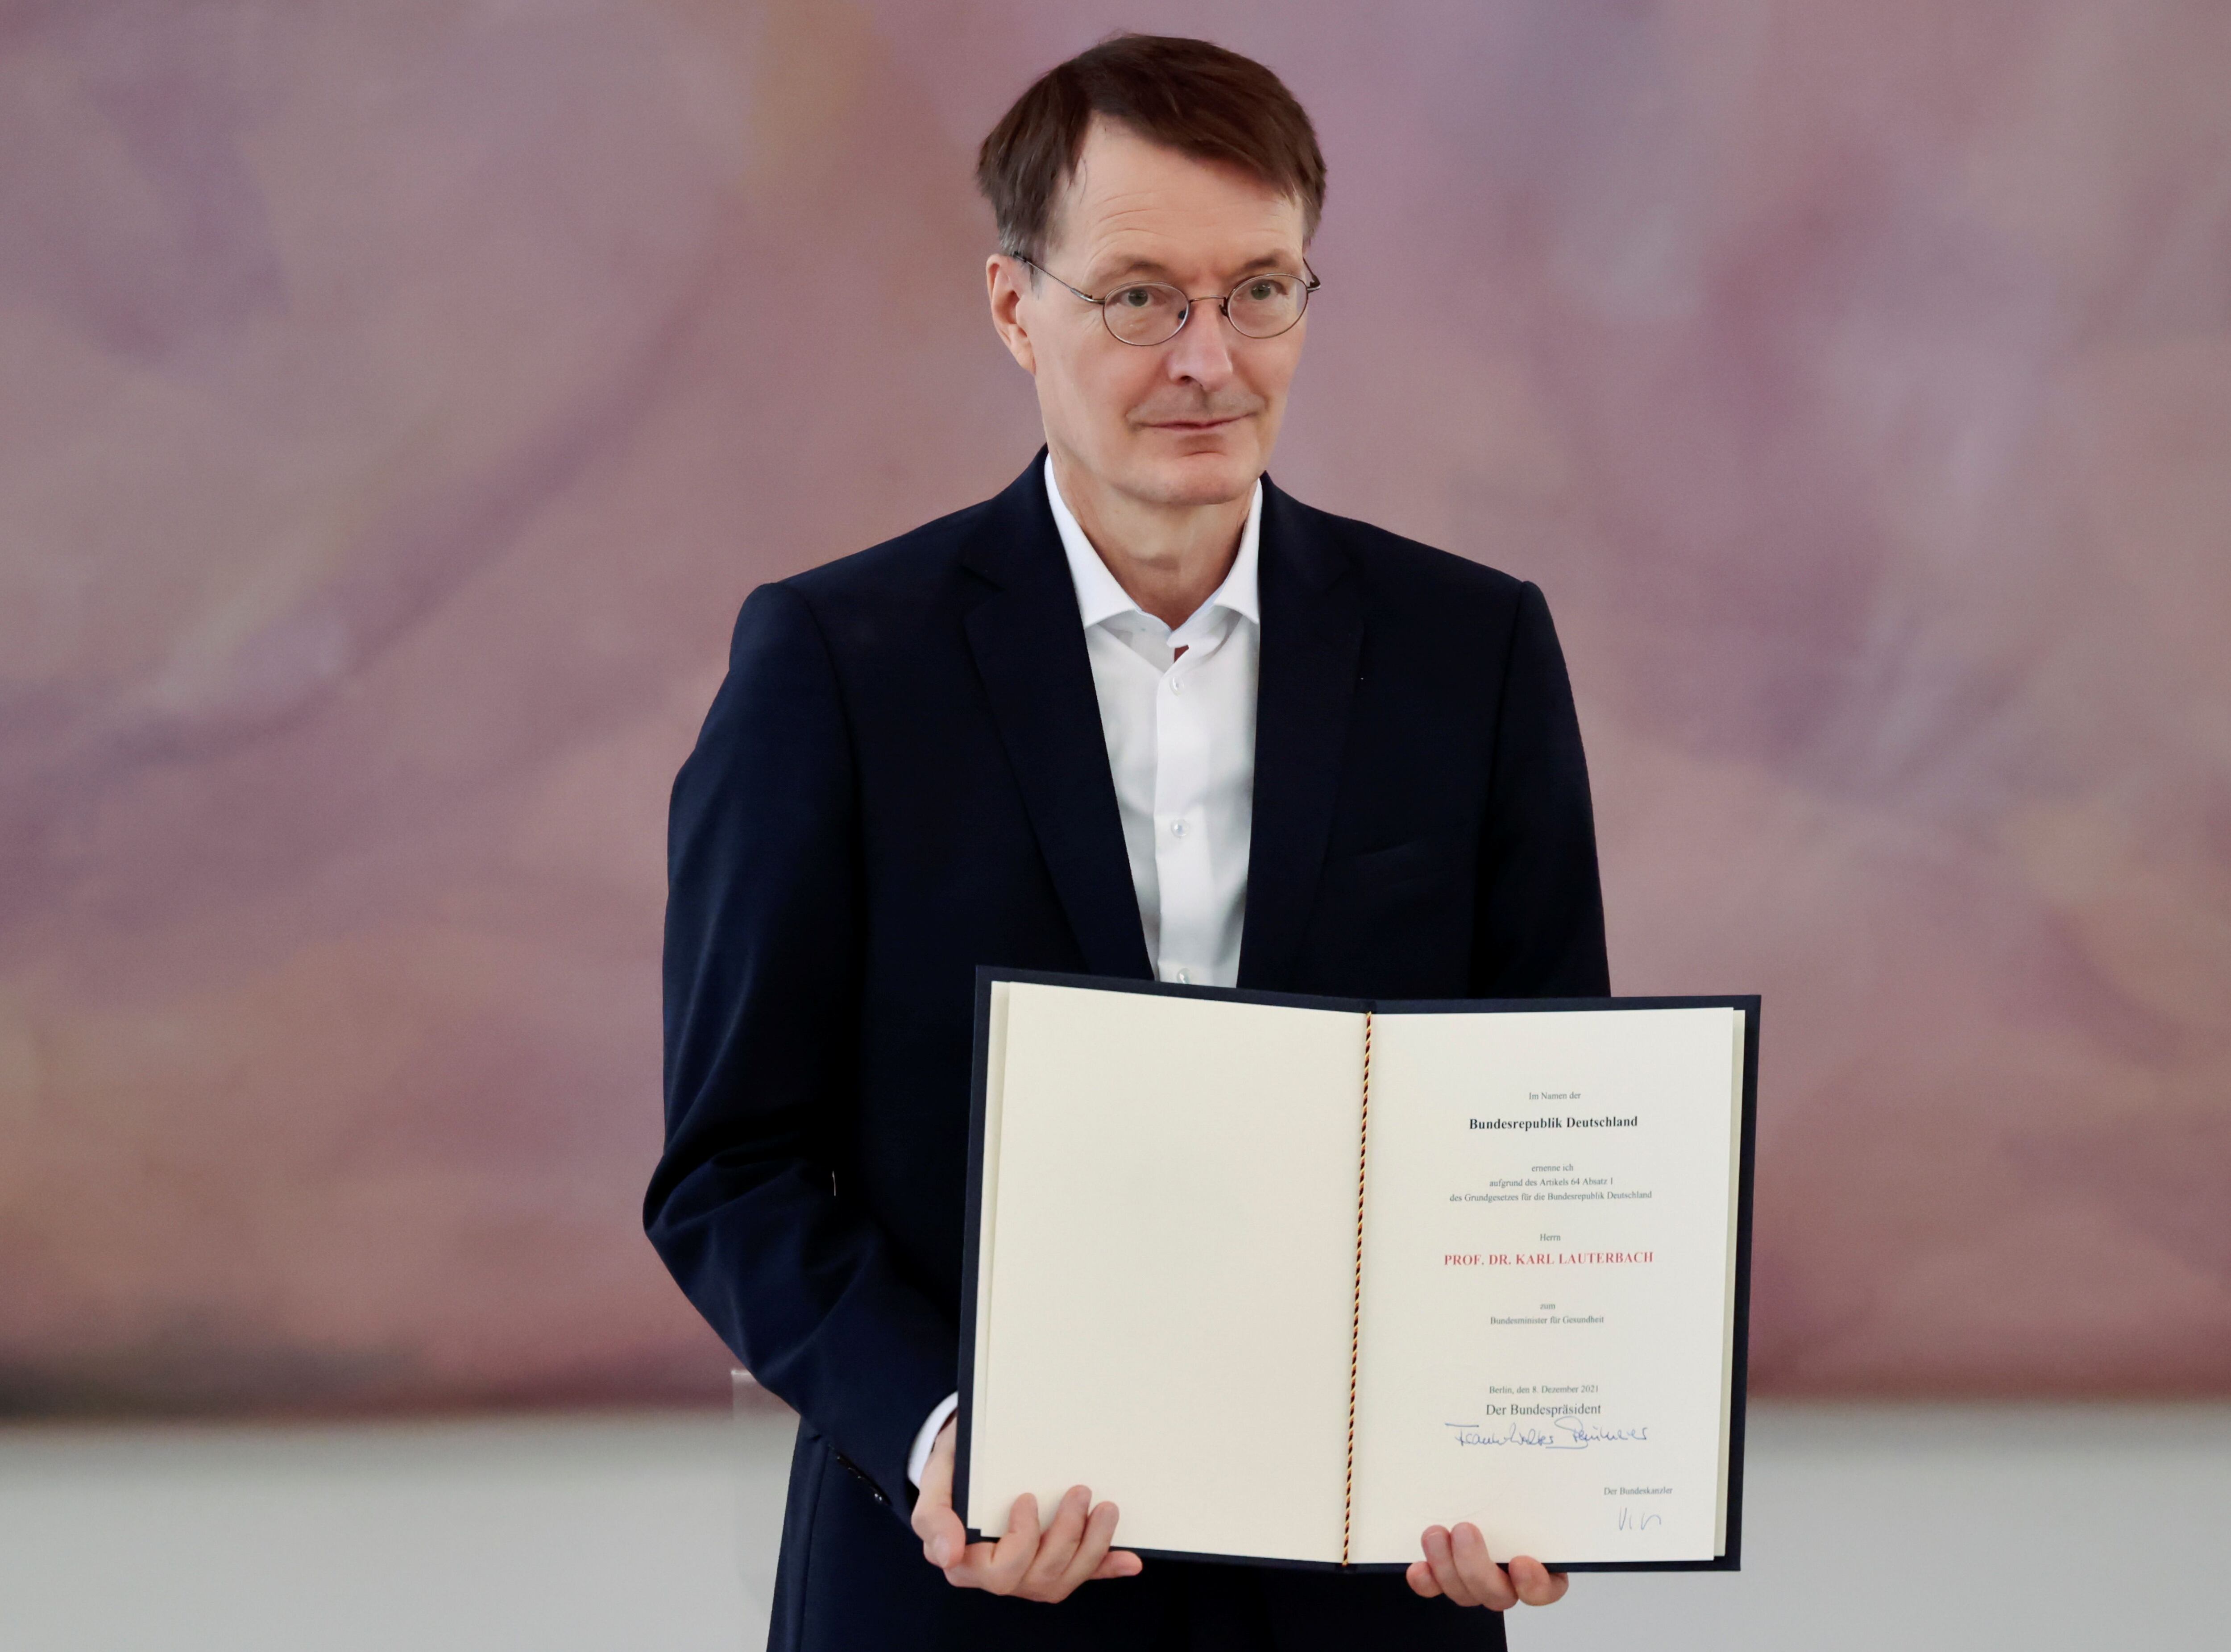 German Health Minister Karl Lauterbach poses after receiving his certificate of appointment from German President Frank-Walter Steinmeier during a ceremony at Bellevue Palace in Berlin, Germany, on December 8, 2021. REUTERS / Hannibal Hanschke